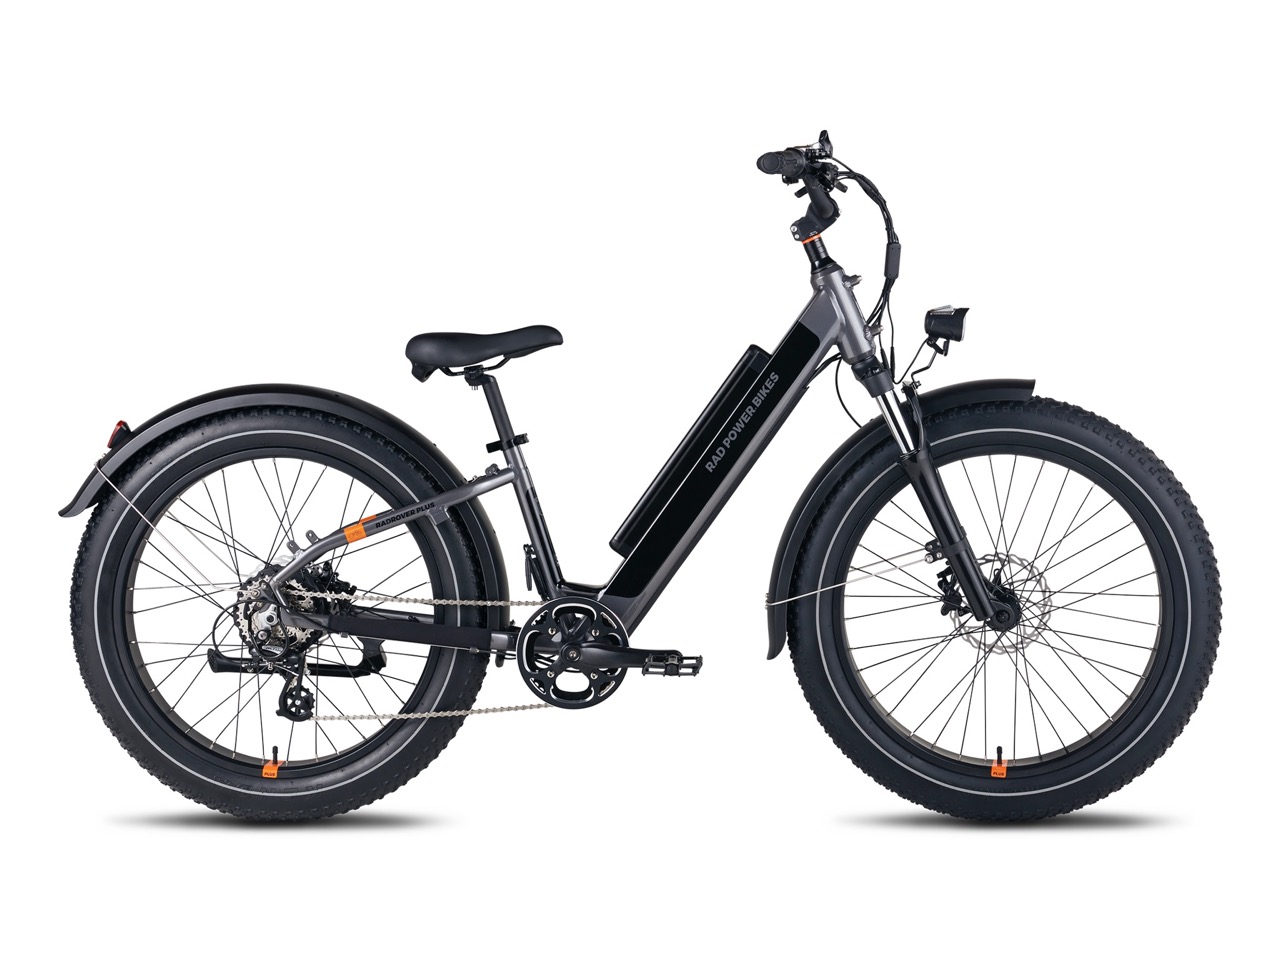 This image showcases a black adult Rad Rover e-bike from Hanging Lake Adventure Co-op and Glenwood Canyon Bikes.